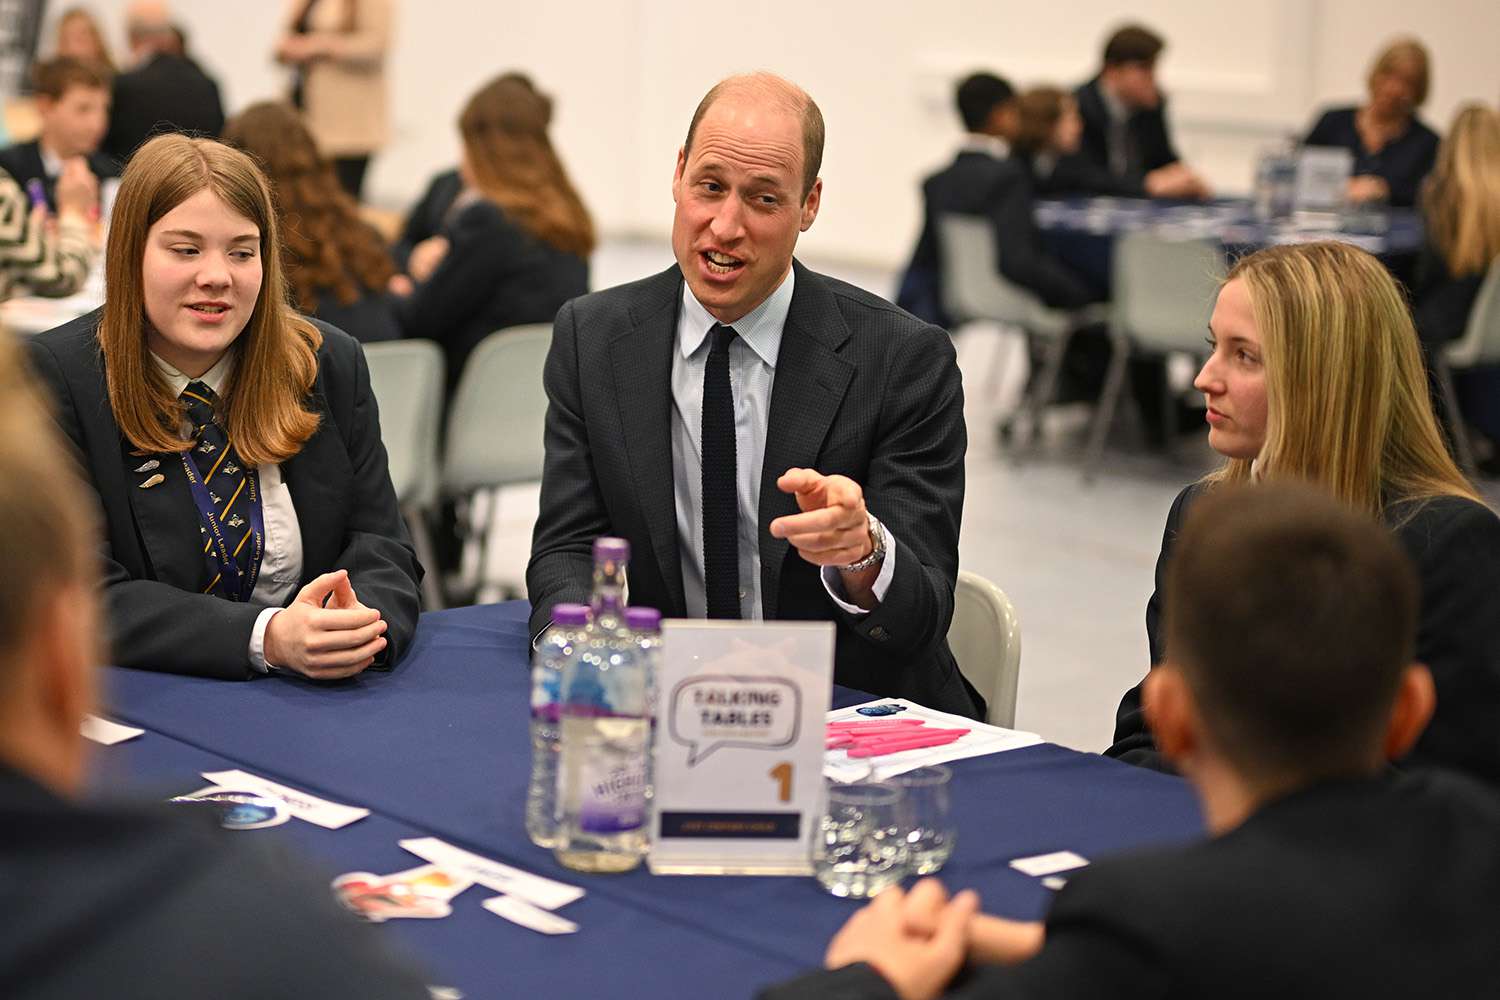 Prince William, Prince of Wales speaks with students using the "Talking Tables" initiative, during a visit to St. Michael's Church of England High School in Rowley Regis